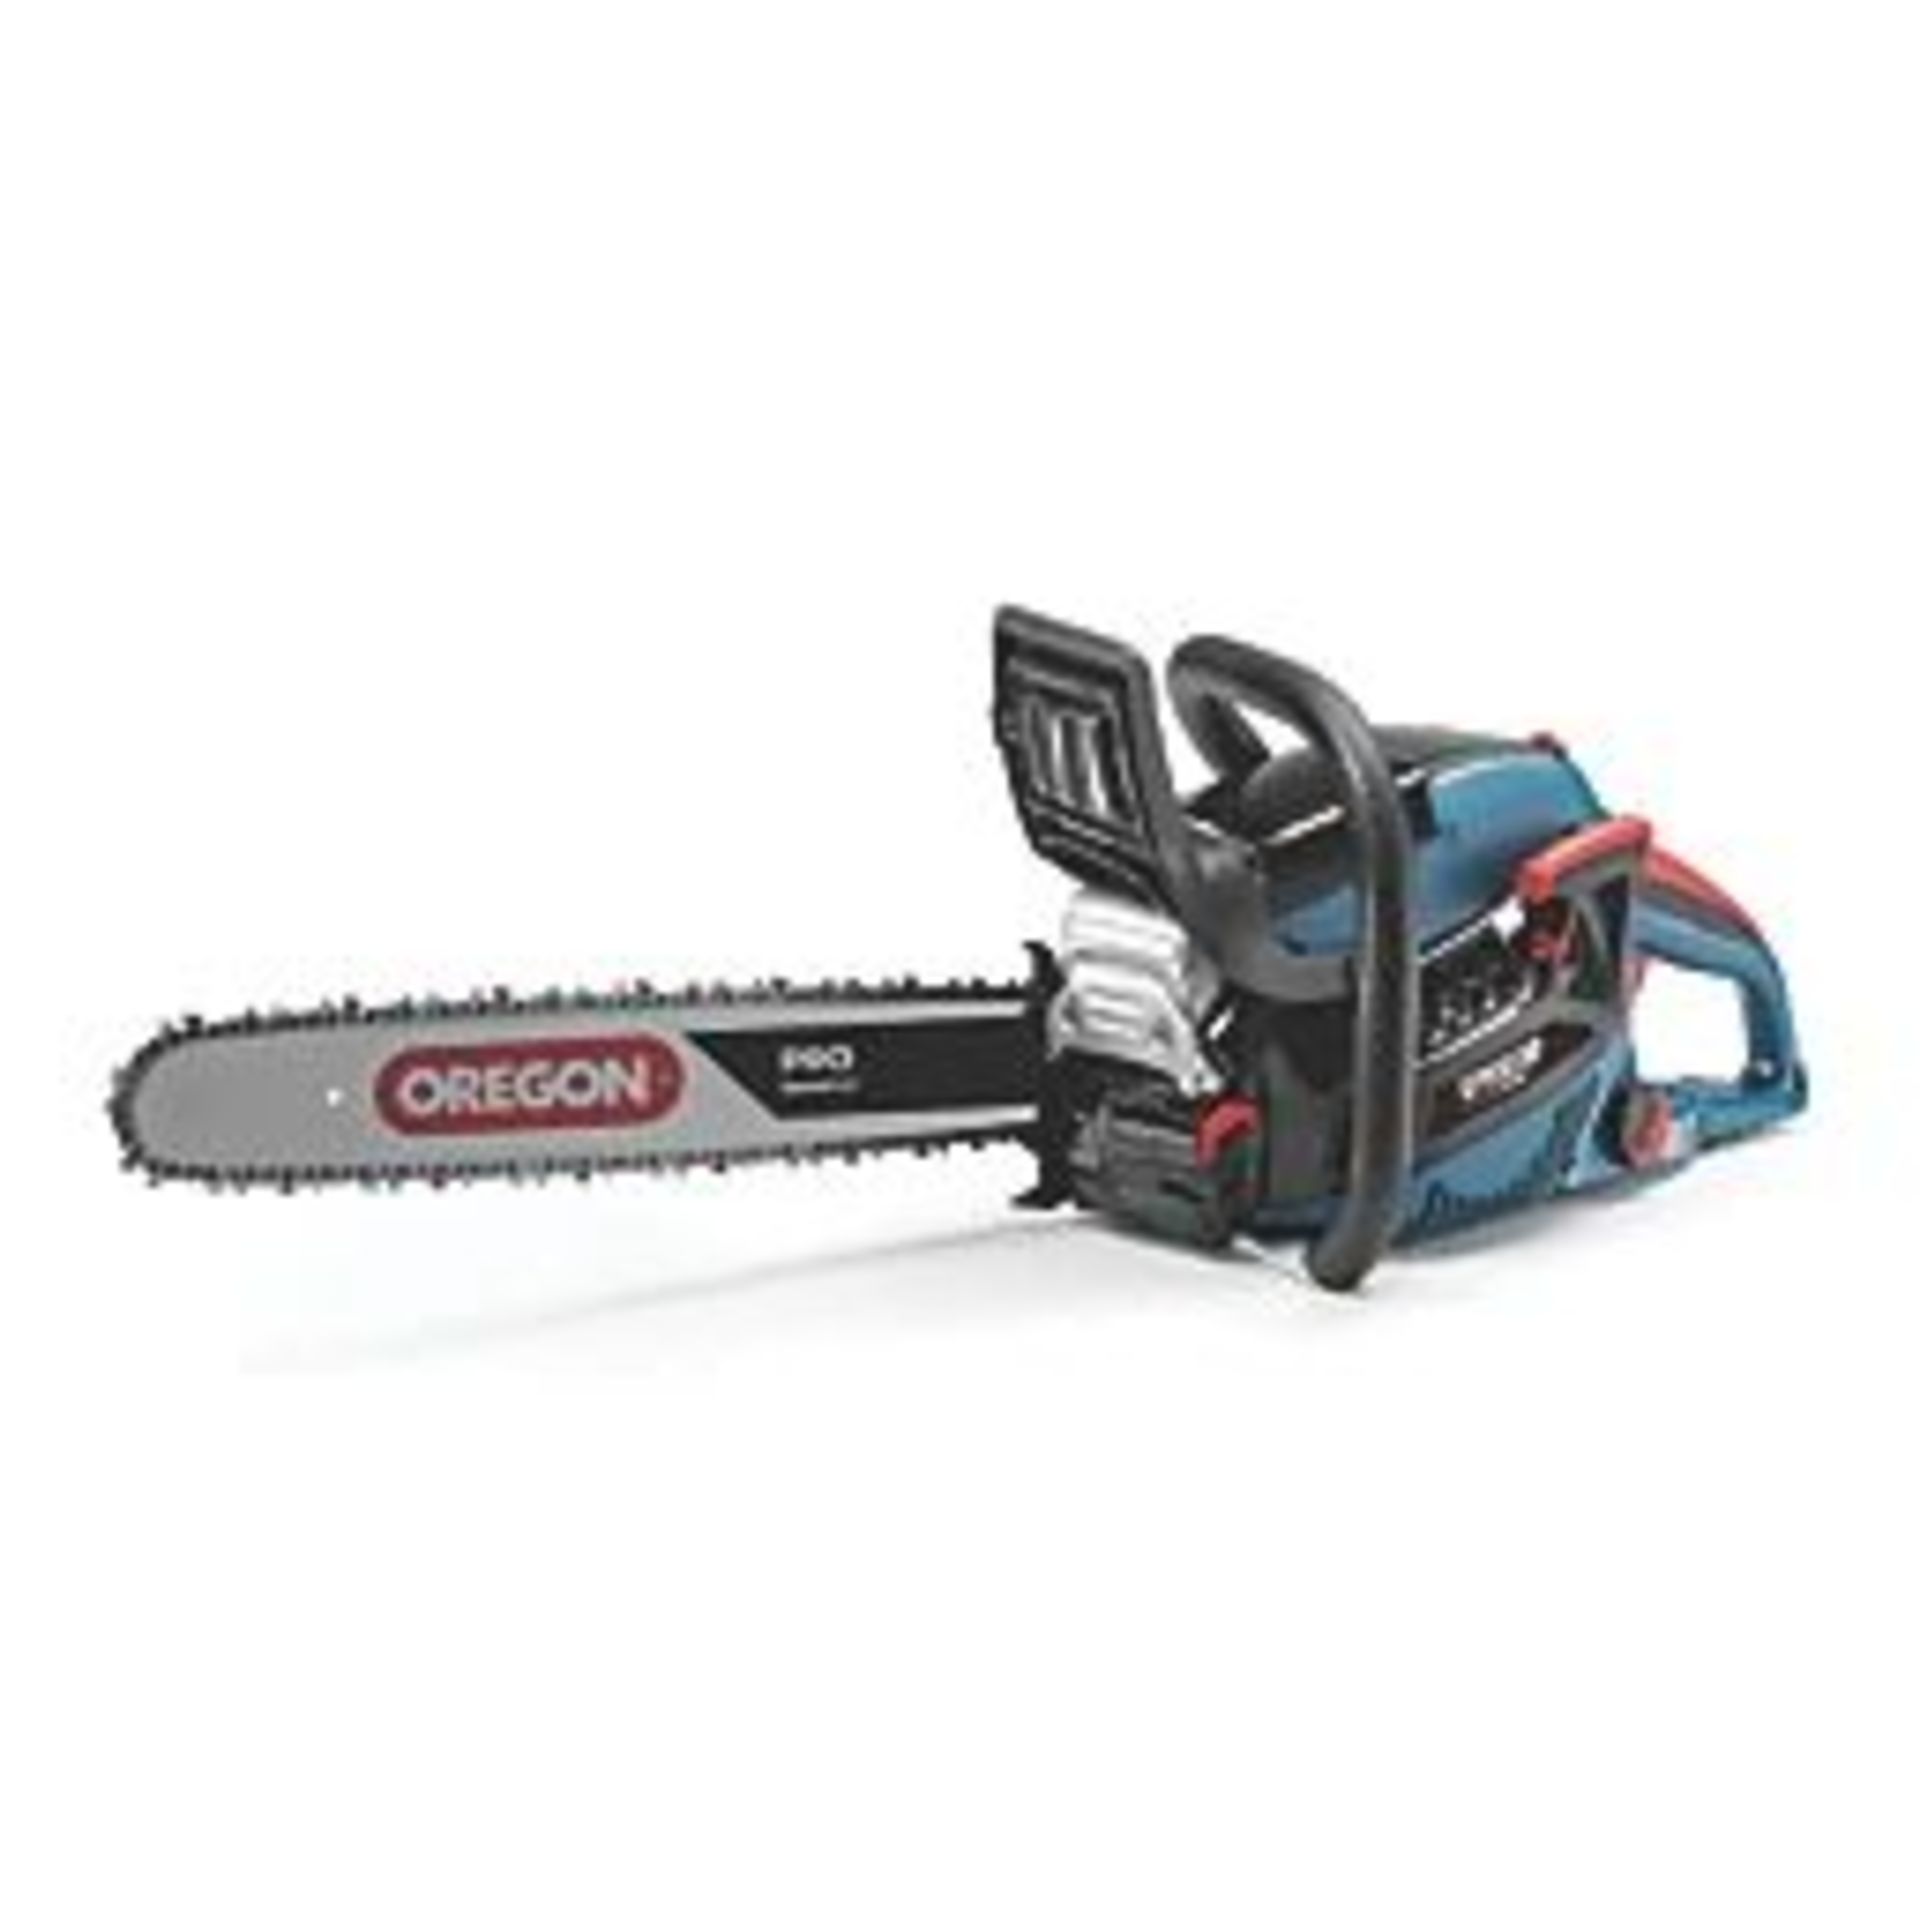 ERBAUER ECSP51 50CM 50.9CC CHAINSAW. -ER41. High performance chainsaw for logging, pruning,